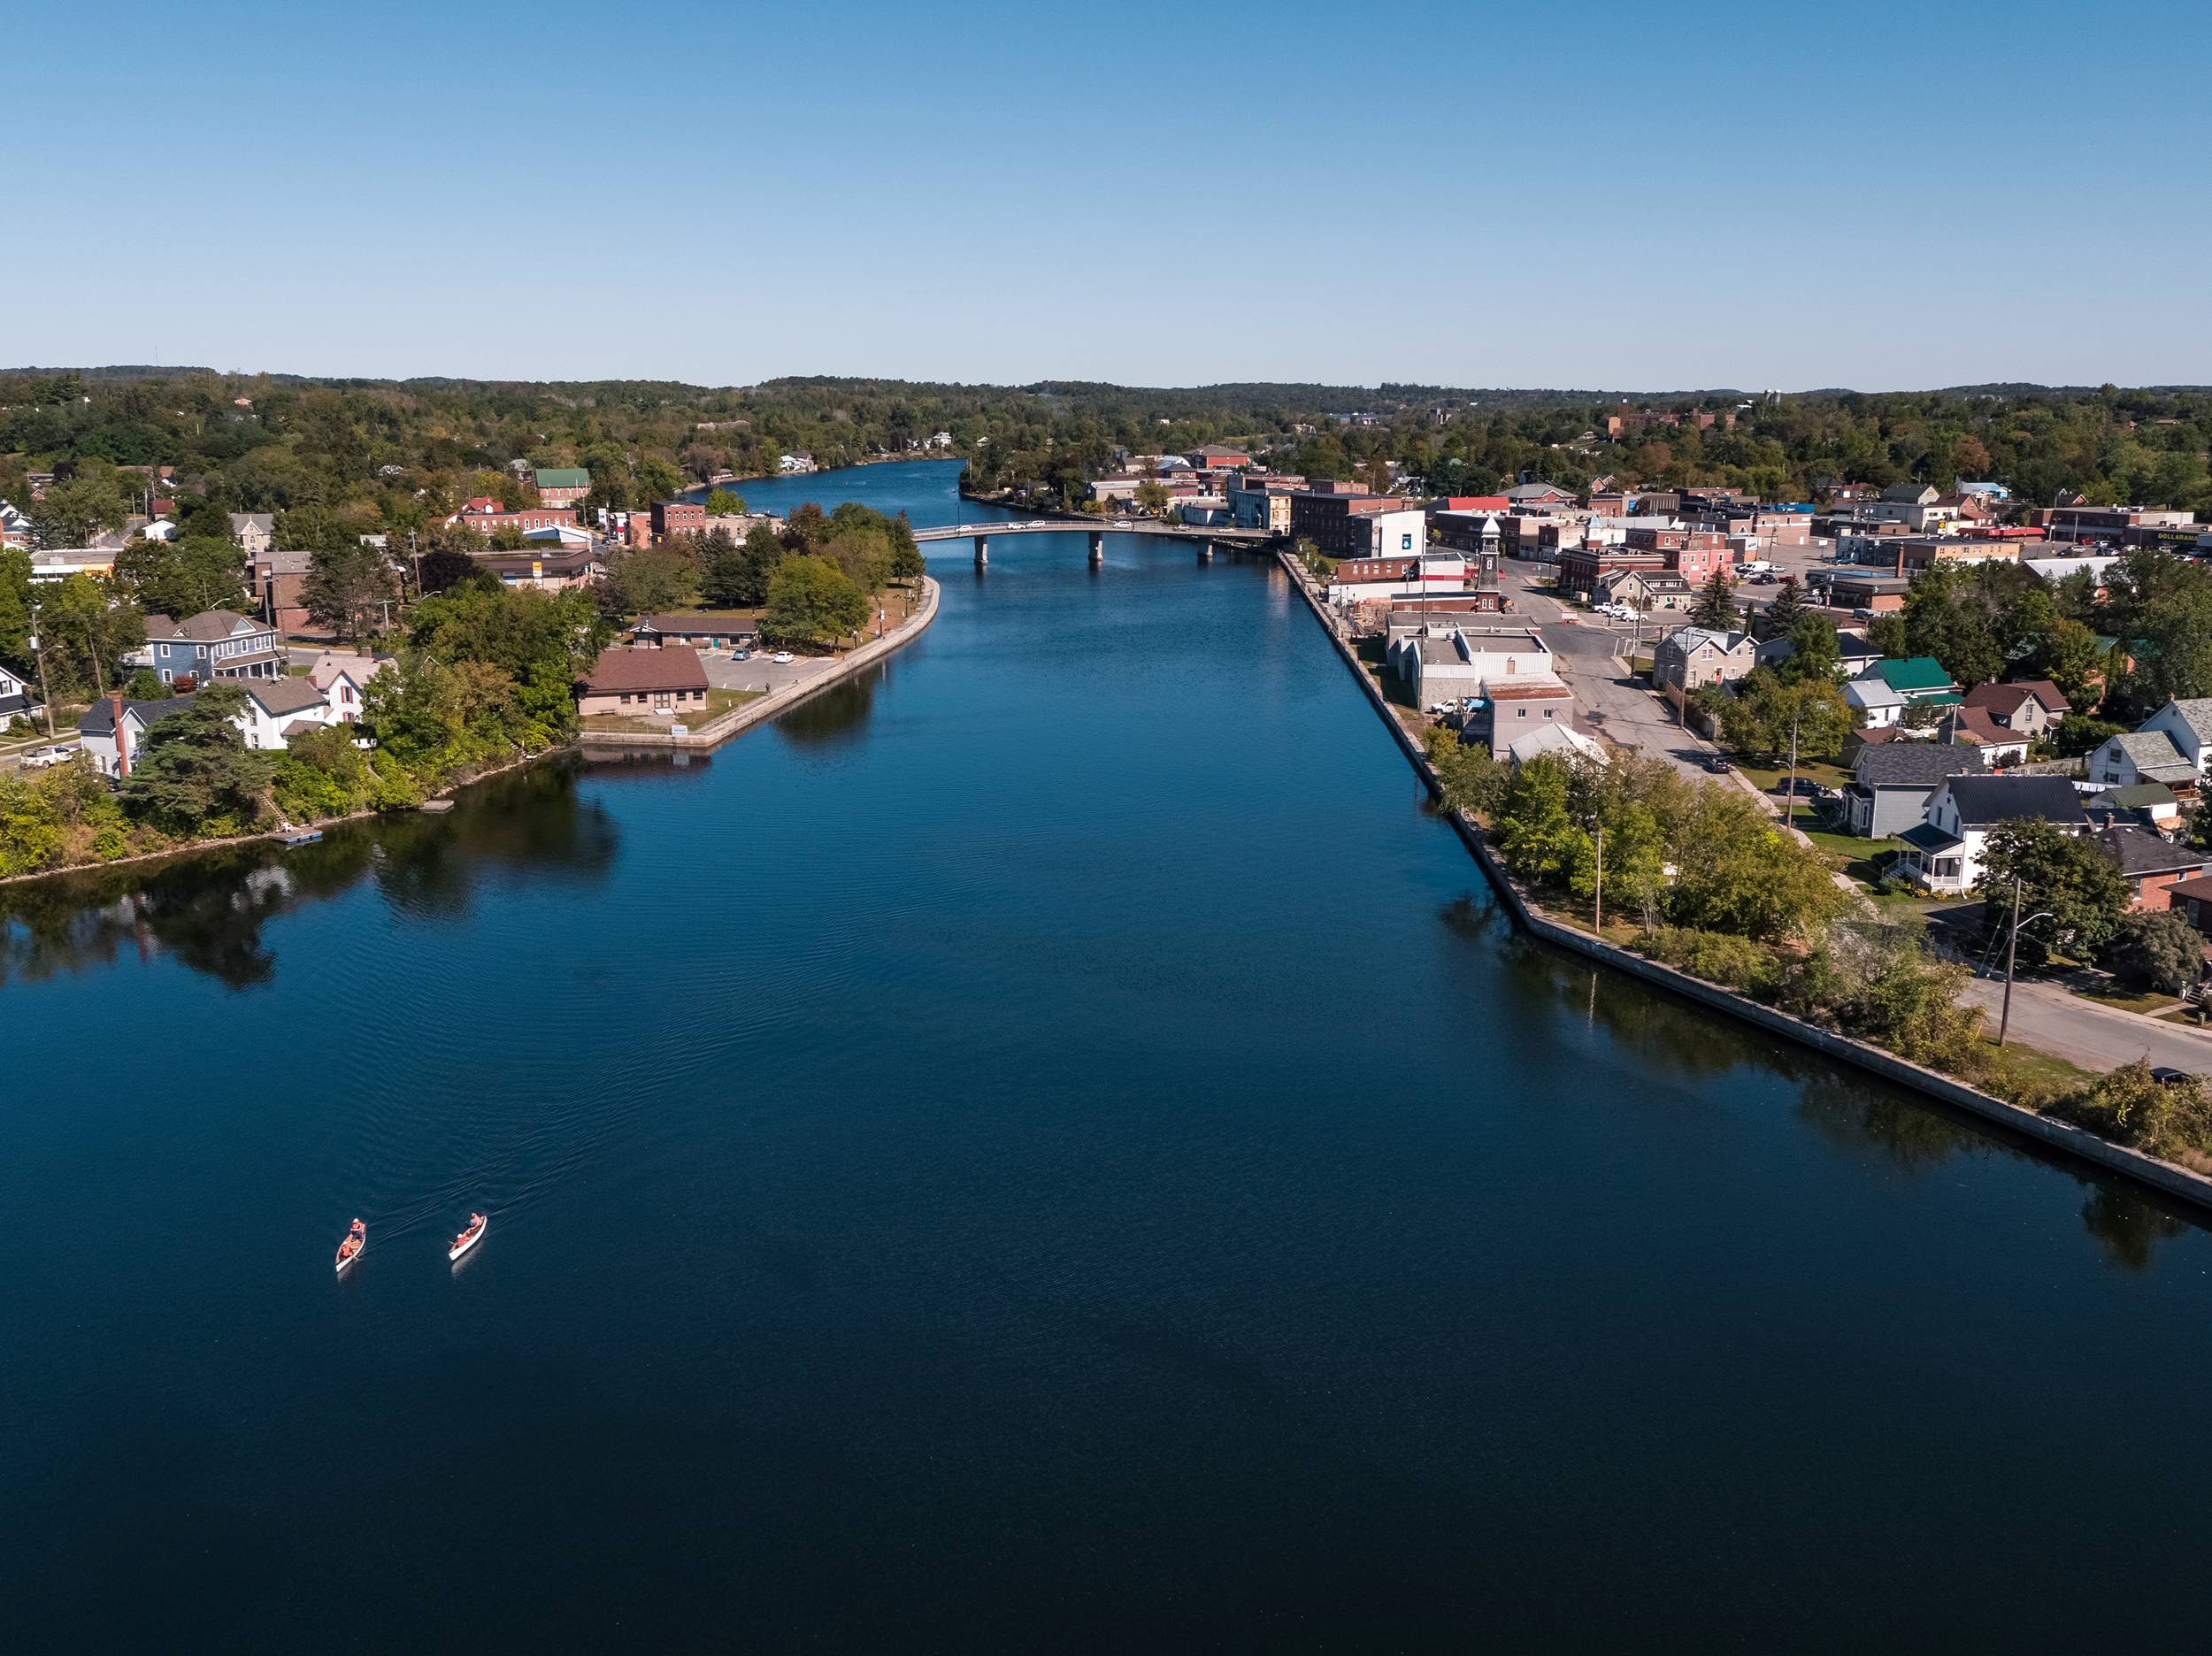 Aerial view of Campbellford, Ontario